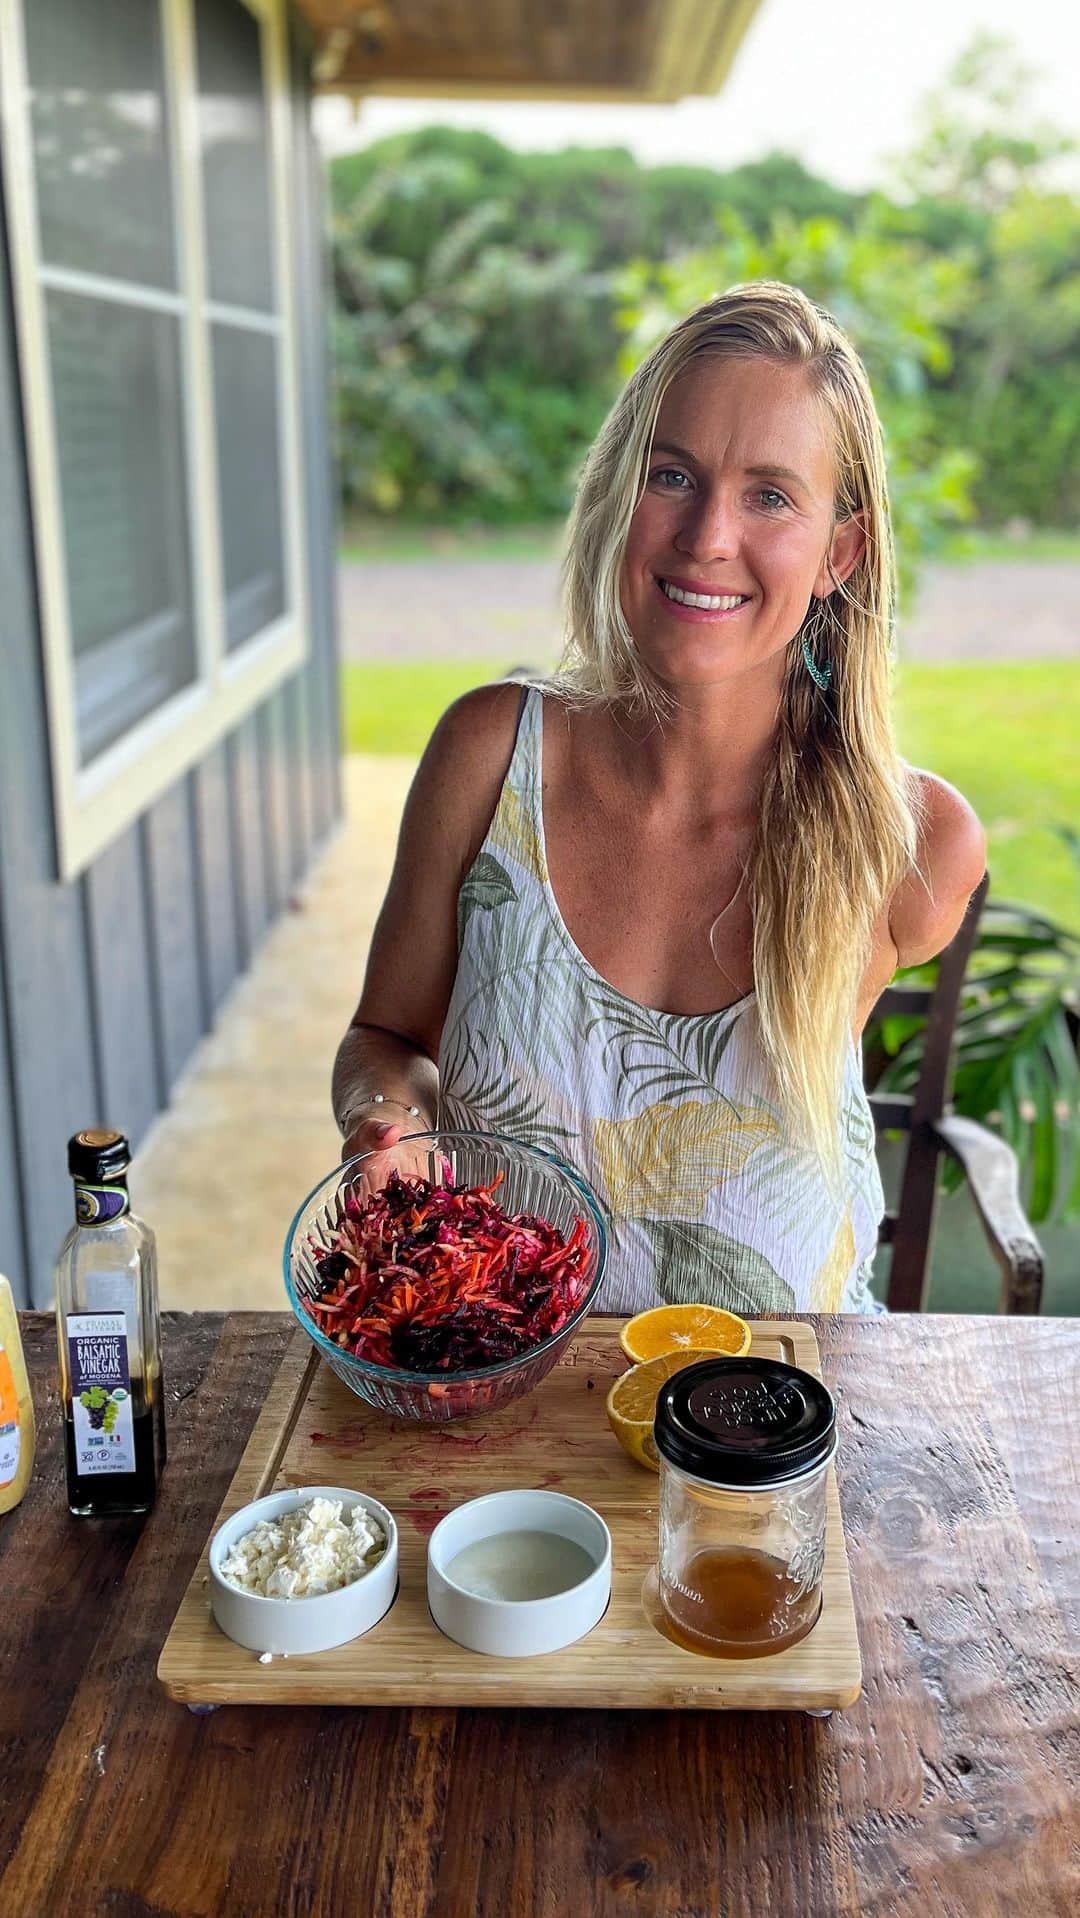 Bethany Hamiltonのインスタグラム：「Sharing my delicious carrot beet salad! This is a salad my whole family enjoys. And it’s a party pleaser! Try this one at home and let me know what you think?!  -1-2 of shredded beets -4 cups of shredded carrots -1 Tbsp honey -1 Tbsp apple cider vinegar -large pinch of sea salt -2 Tbsp @primalkitchenfoods balsamic vinegar -1 tsp primal kitchen mustard -3 Tbsp coconut oil -a squeeze of orange -feta cheese for topping  #bethanystylehealth #primalkitchen #sponsored #biggerbite」